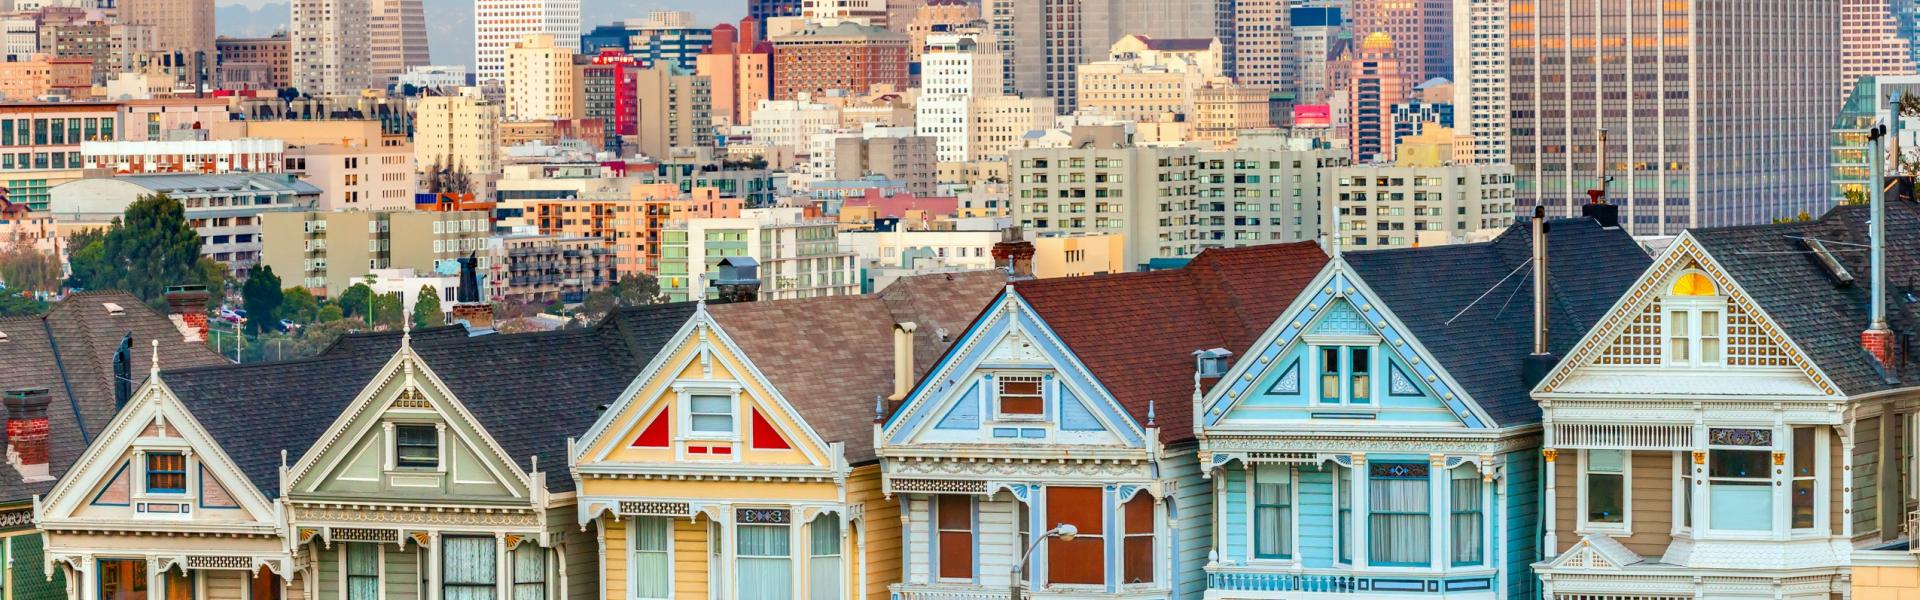 Find the perfect vacation home in San Francisco - Casamundo